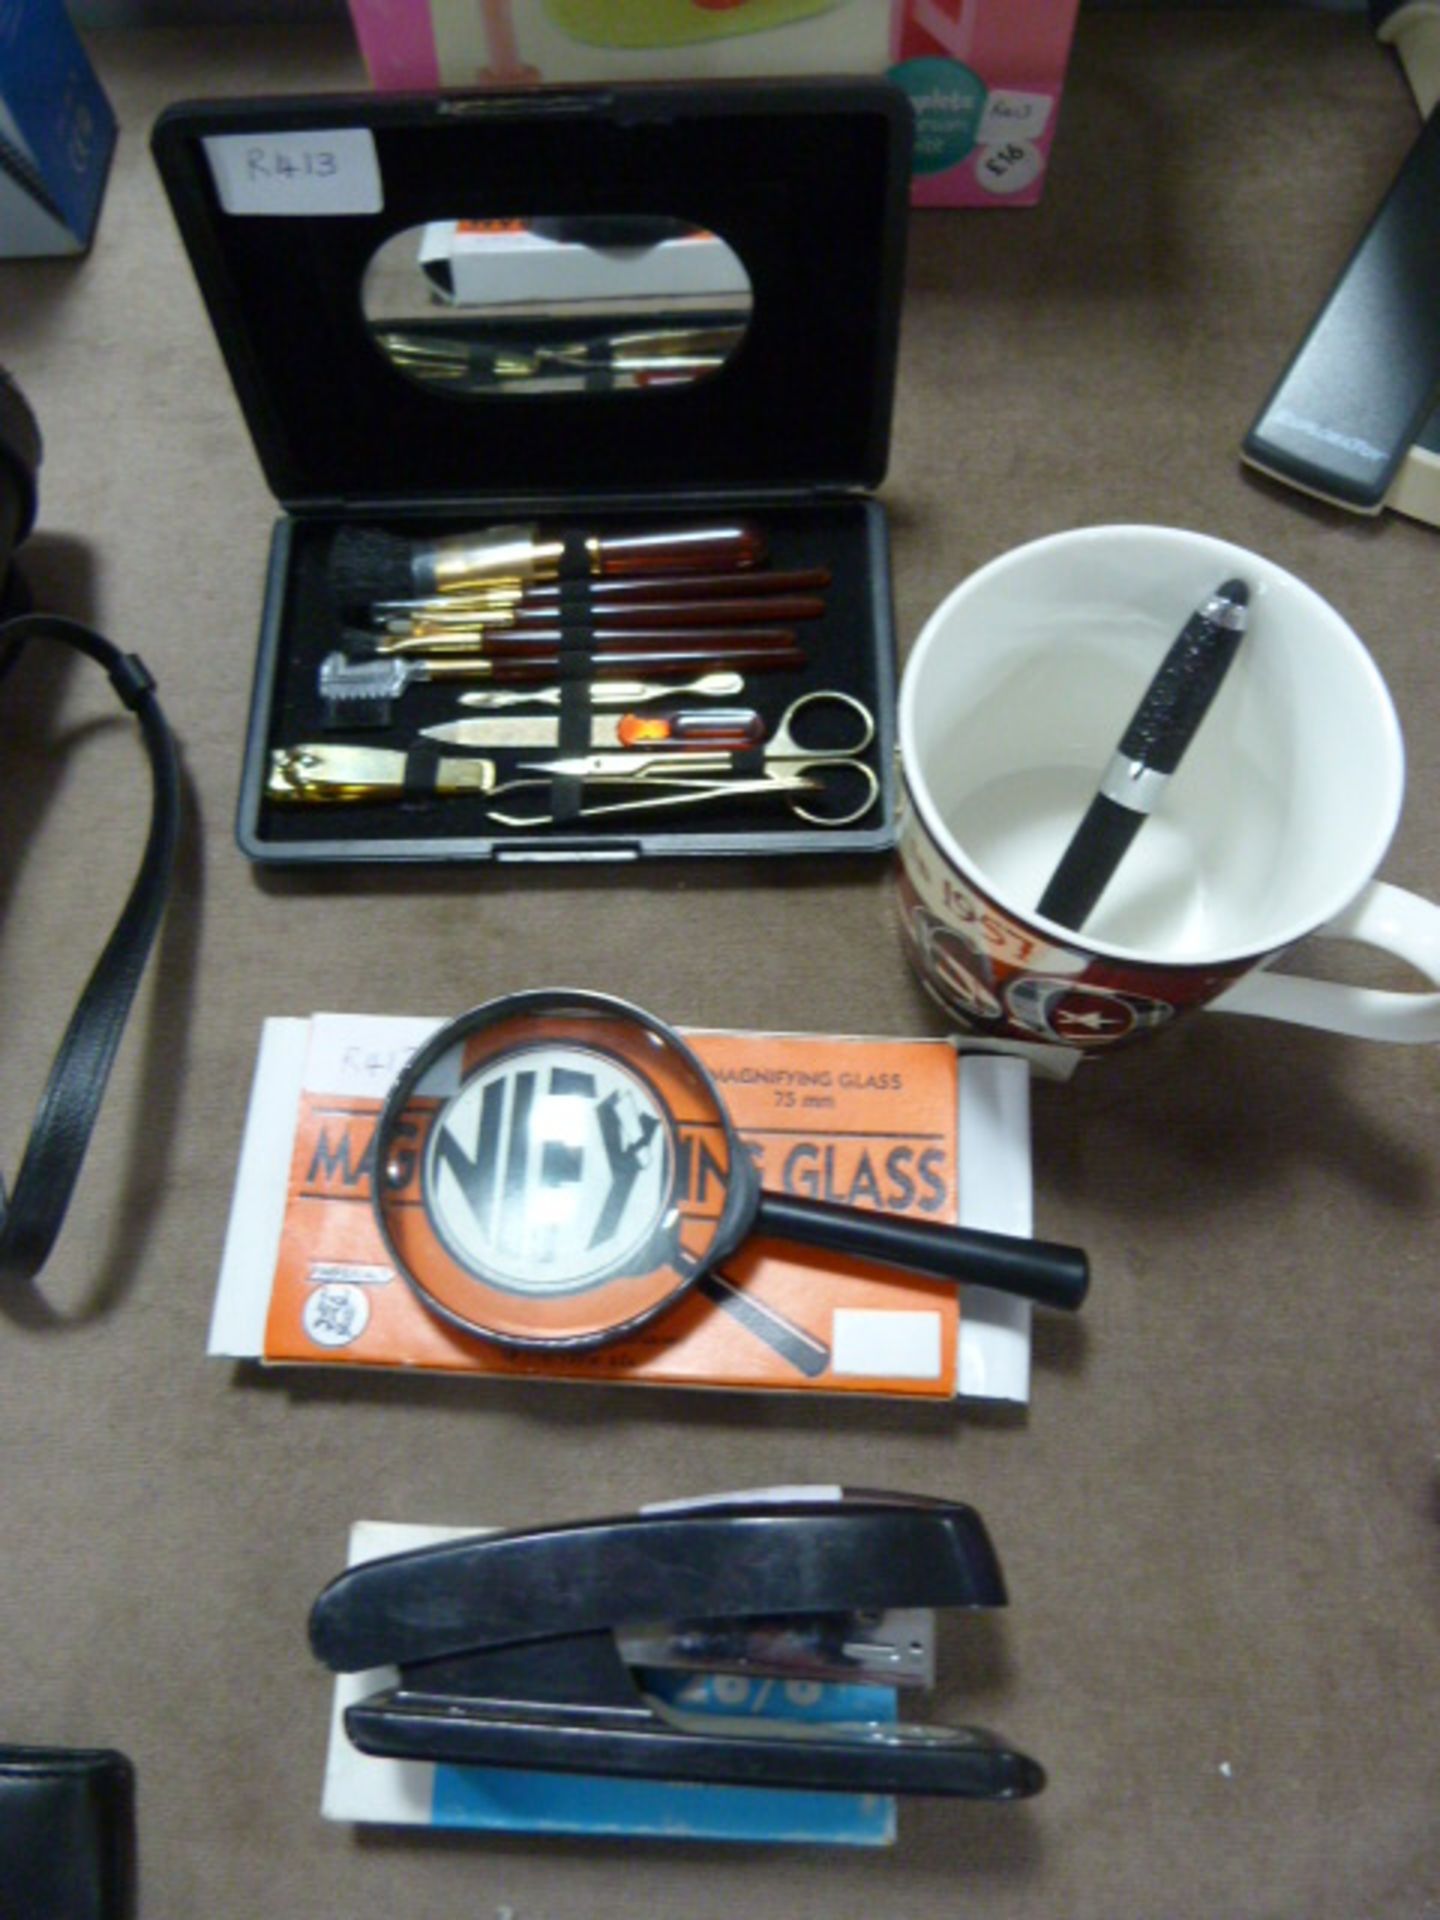 Manicure Set, Staple Gun, Magnifying Glass and a M